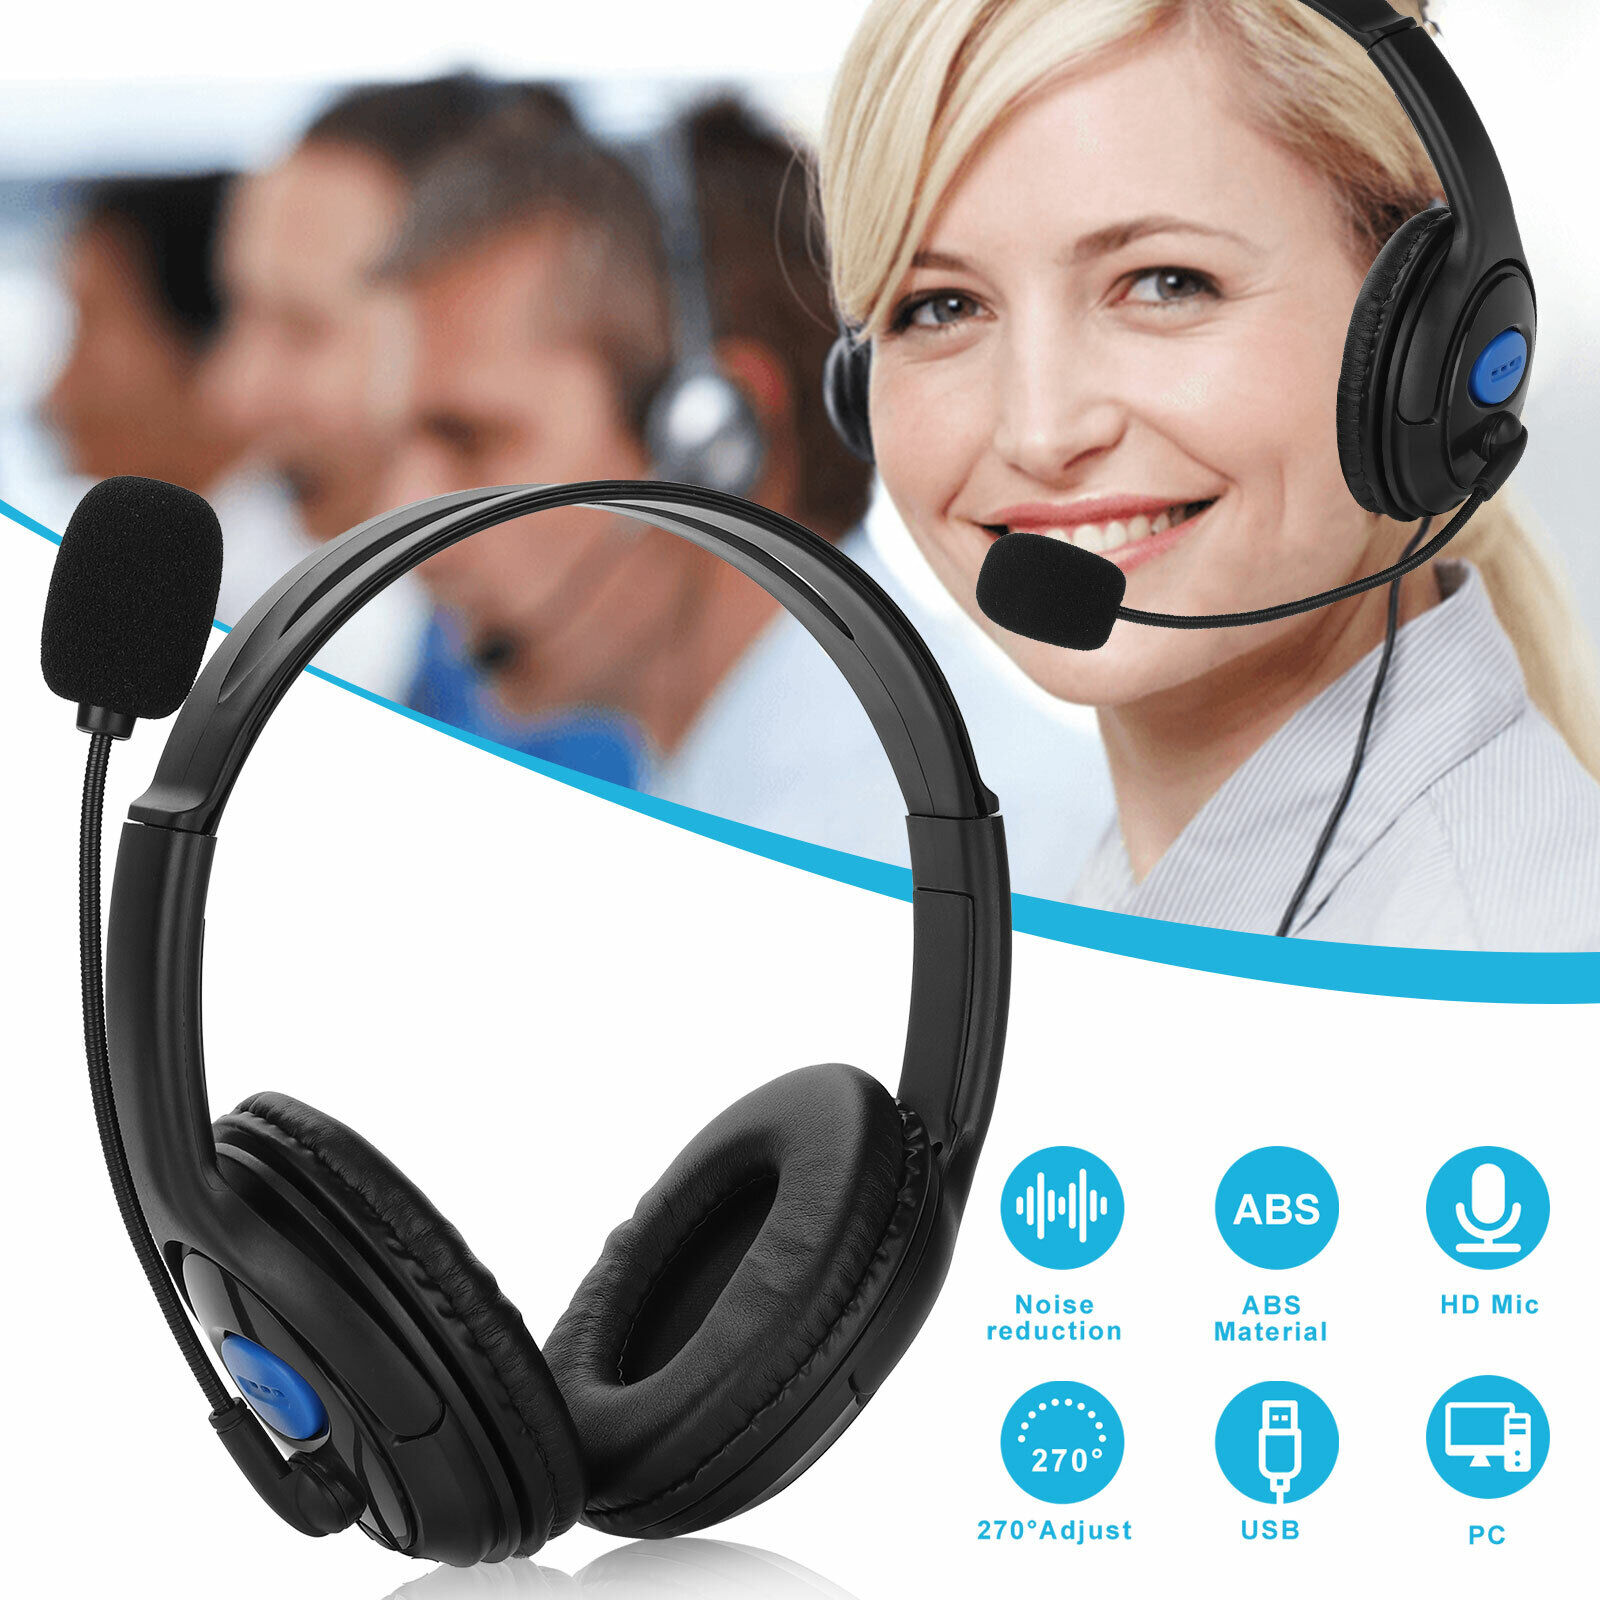 USB Headset Microphone Noise Cancelling Computer Headset for PC Chat Call Center